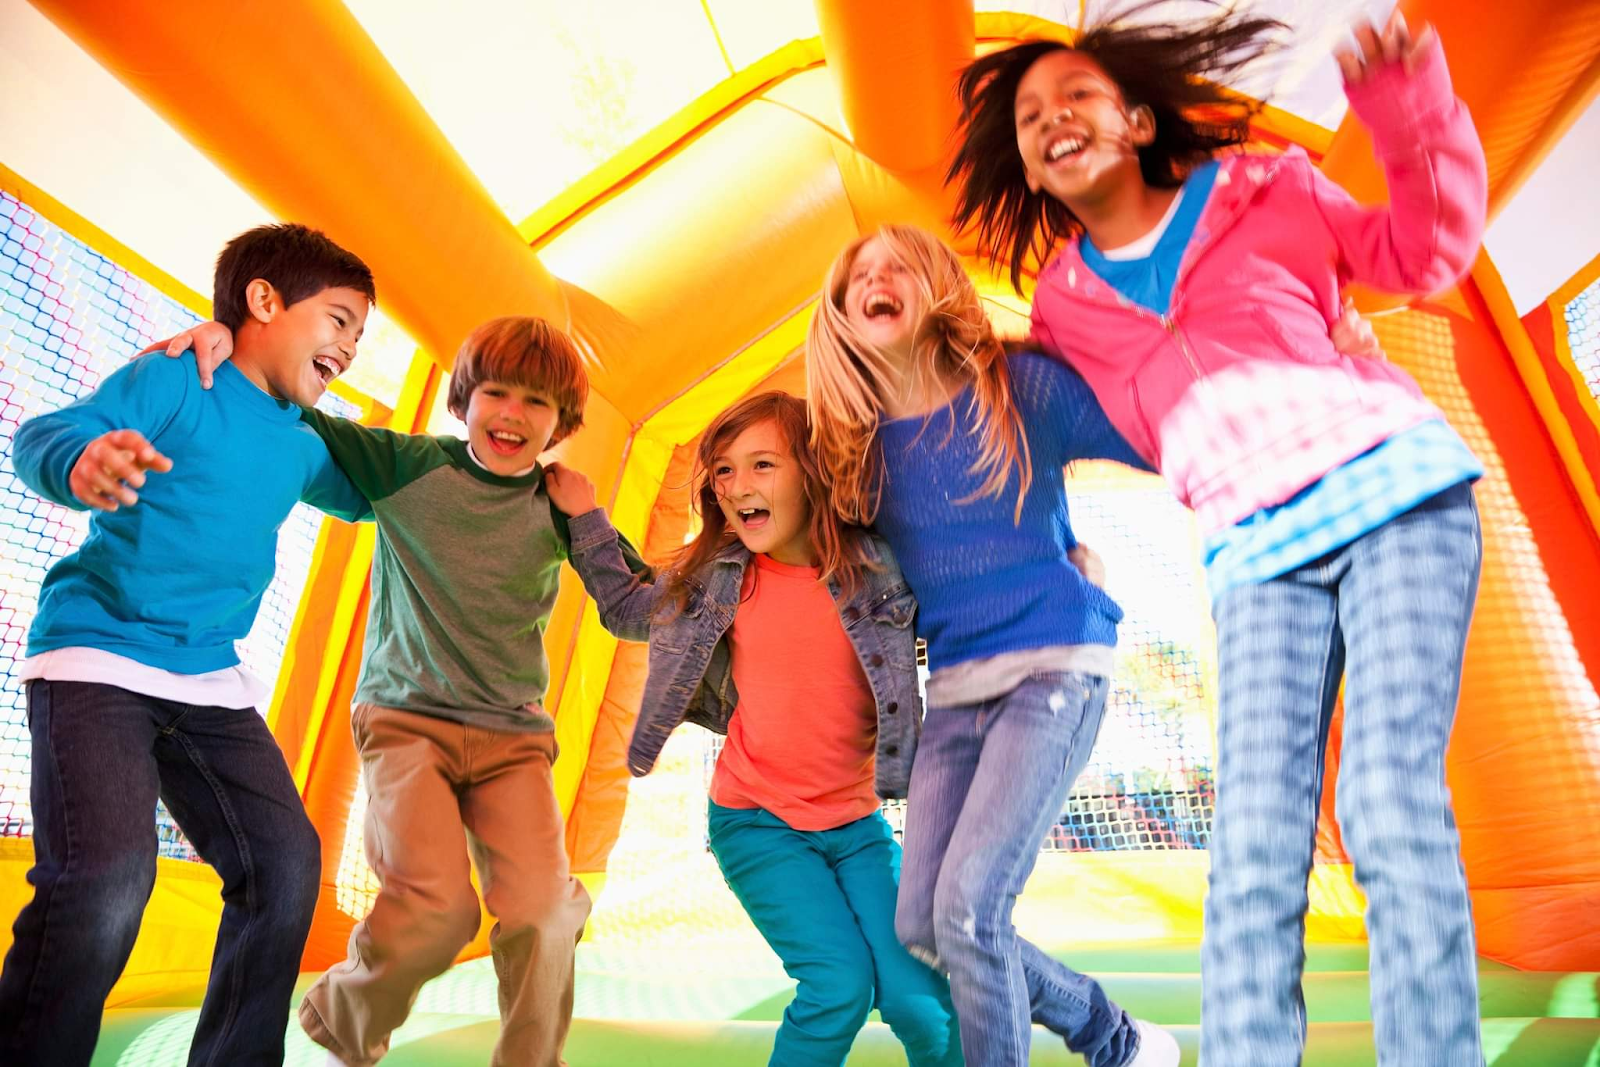 Bouncy Castles and Child Development: Encouraging Active Play and Coordination